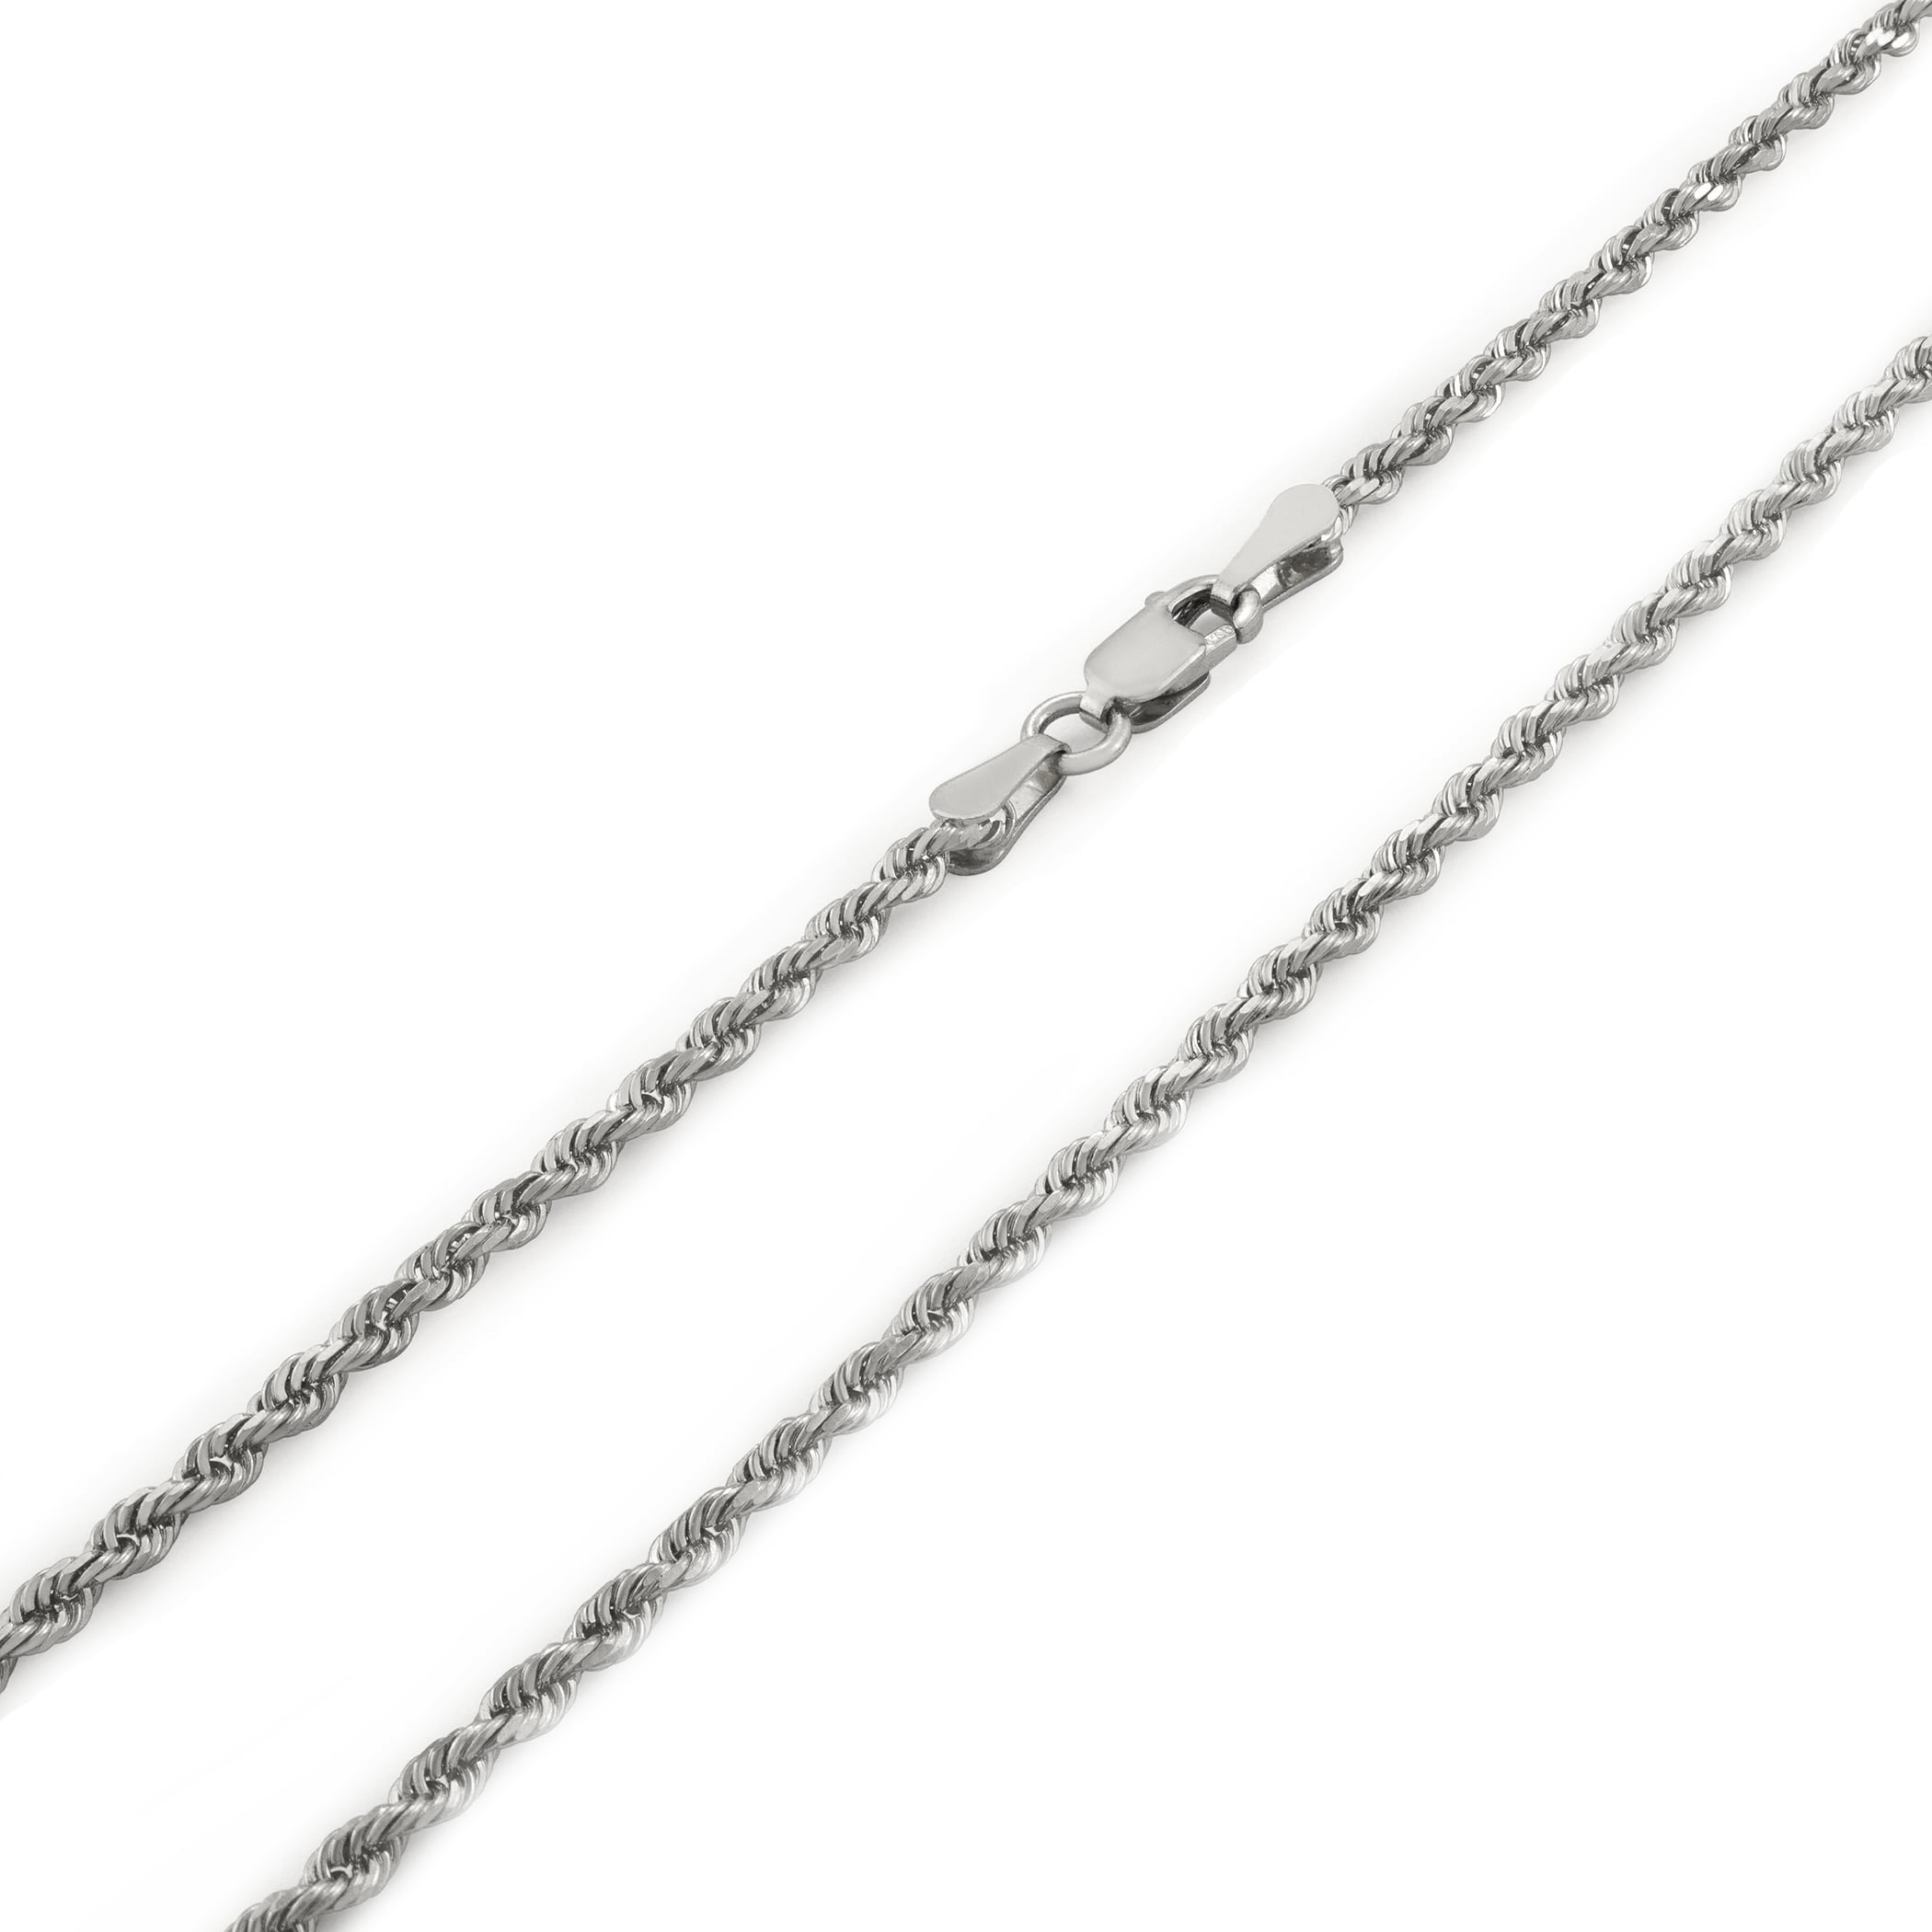 SOLID 14K WHITE GOLD SINGAPORE CHAIN ANKLET 9" ONLY $39.99